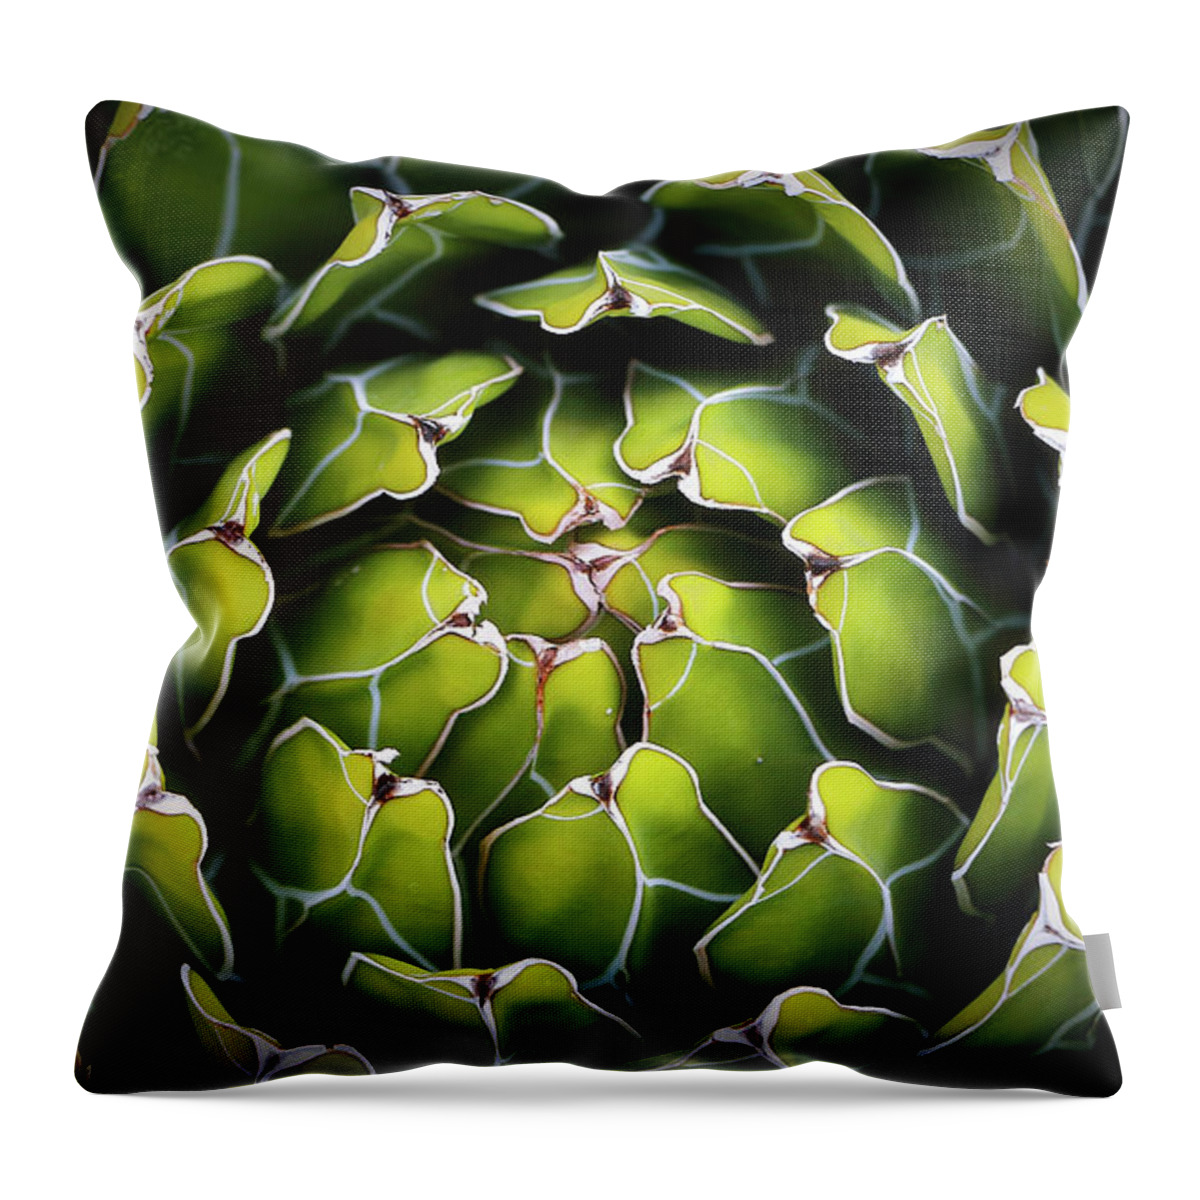 Cacti Throw Pillow featuring the photograph Cacti by Elaine Malott